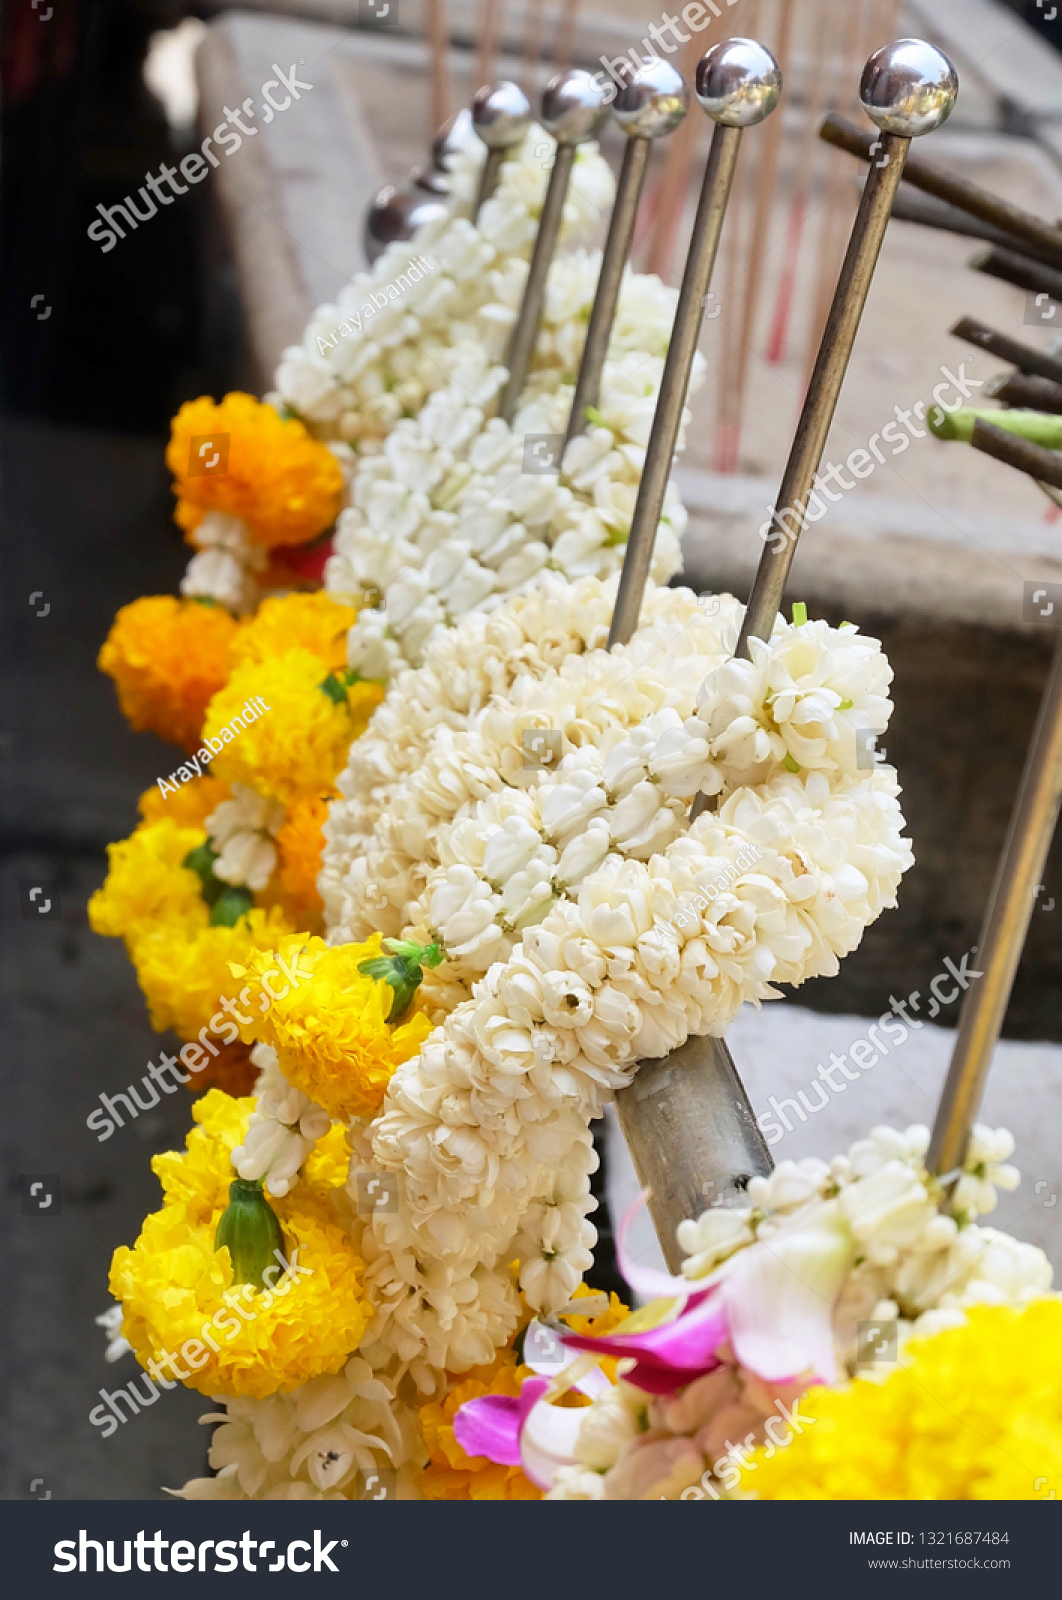 Beautiful Jasmine Wreaths or Garlands with Yellow Marigold Flowers, The Garland in Thai Tradition Style Used to Pay Respect to The Buddha. #1321687484